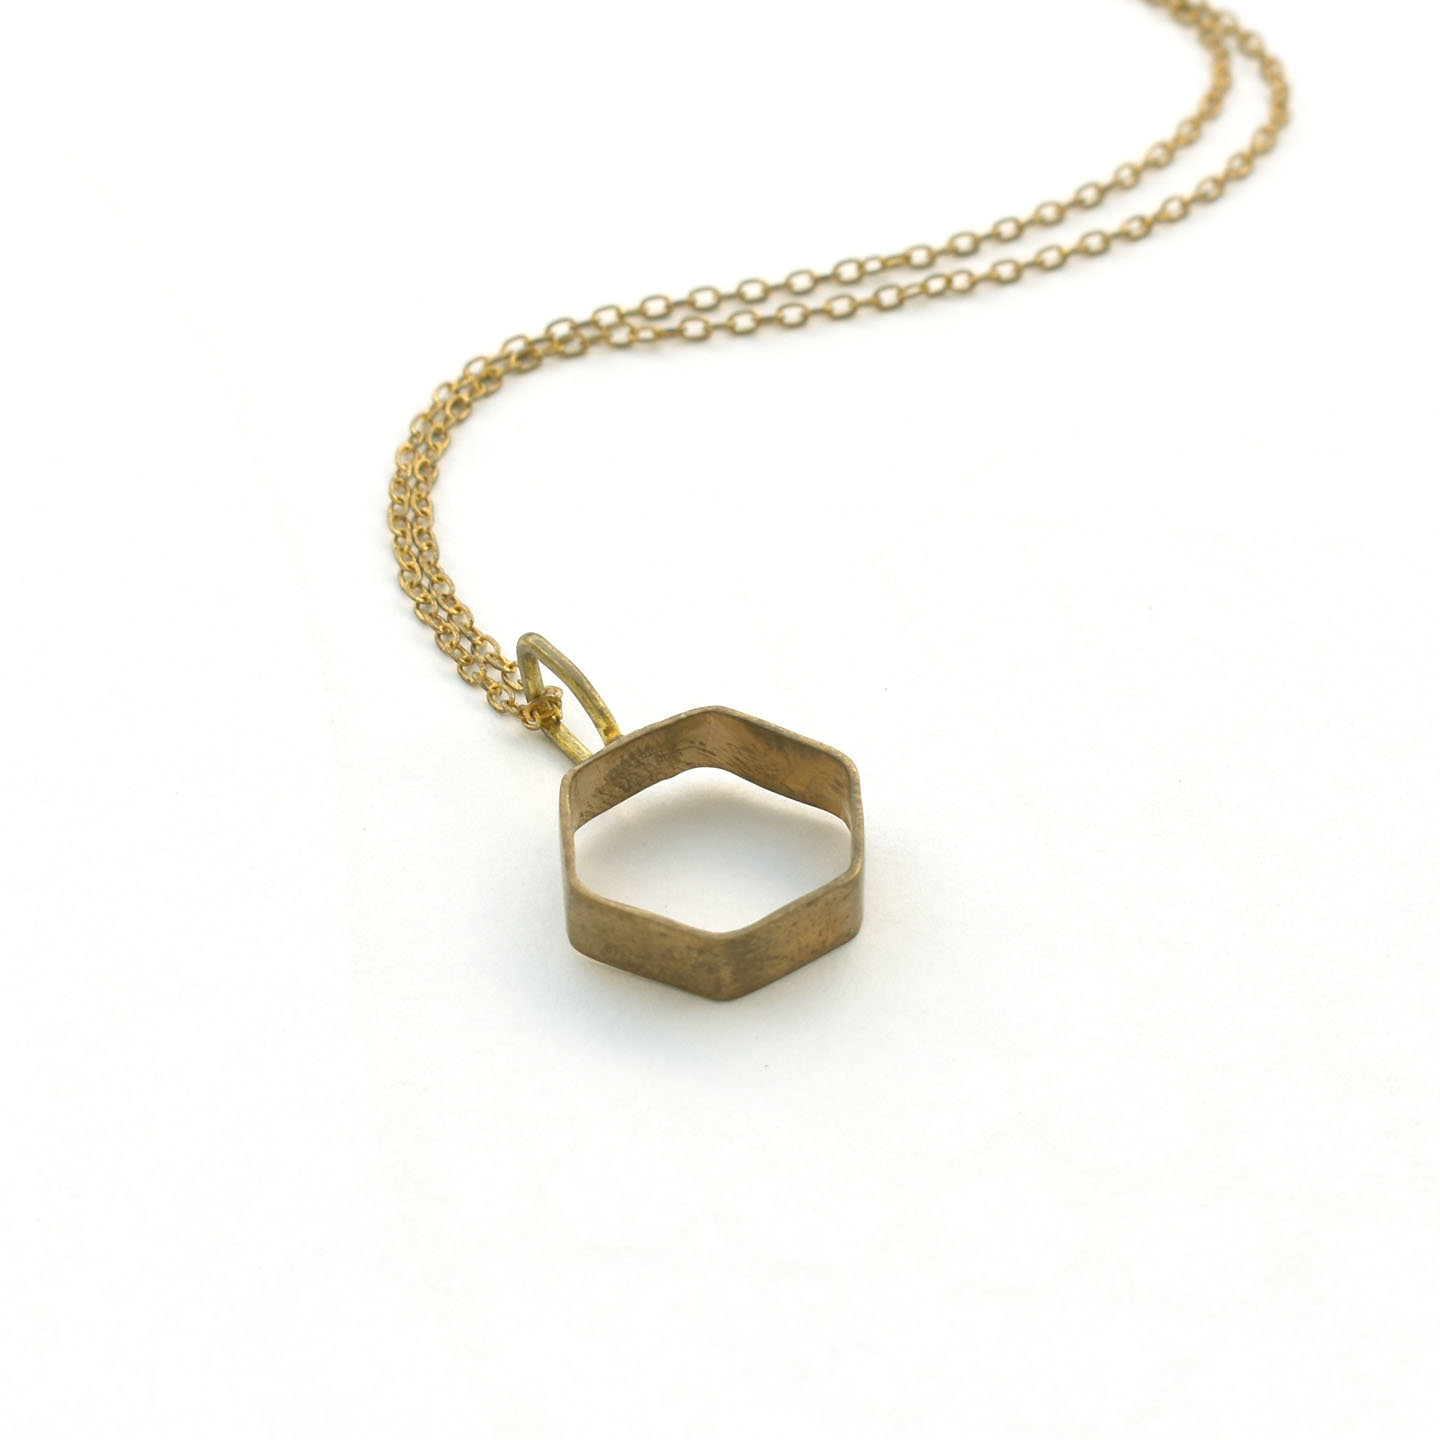 Brass Honeycomb Charm Necklace - Home